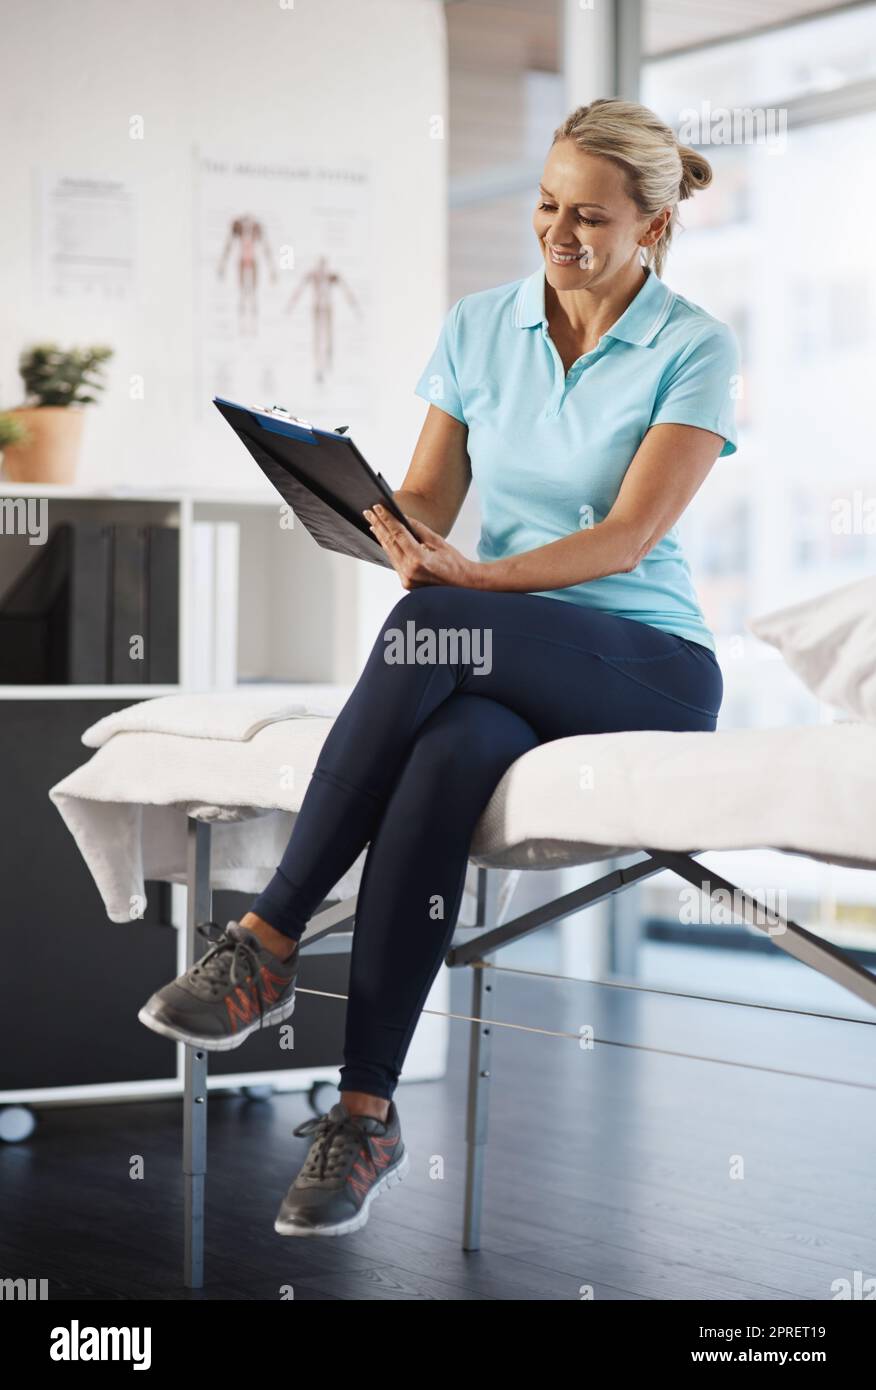 Updating her records. Full length shot of a mature female physiotherapist working in her office. Stock Photo